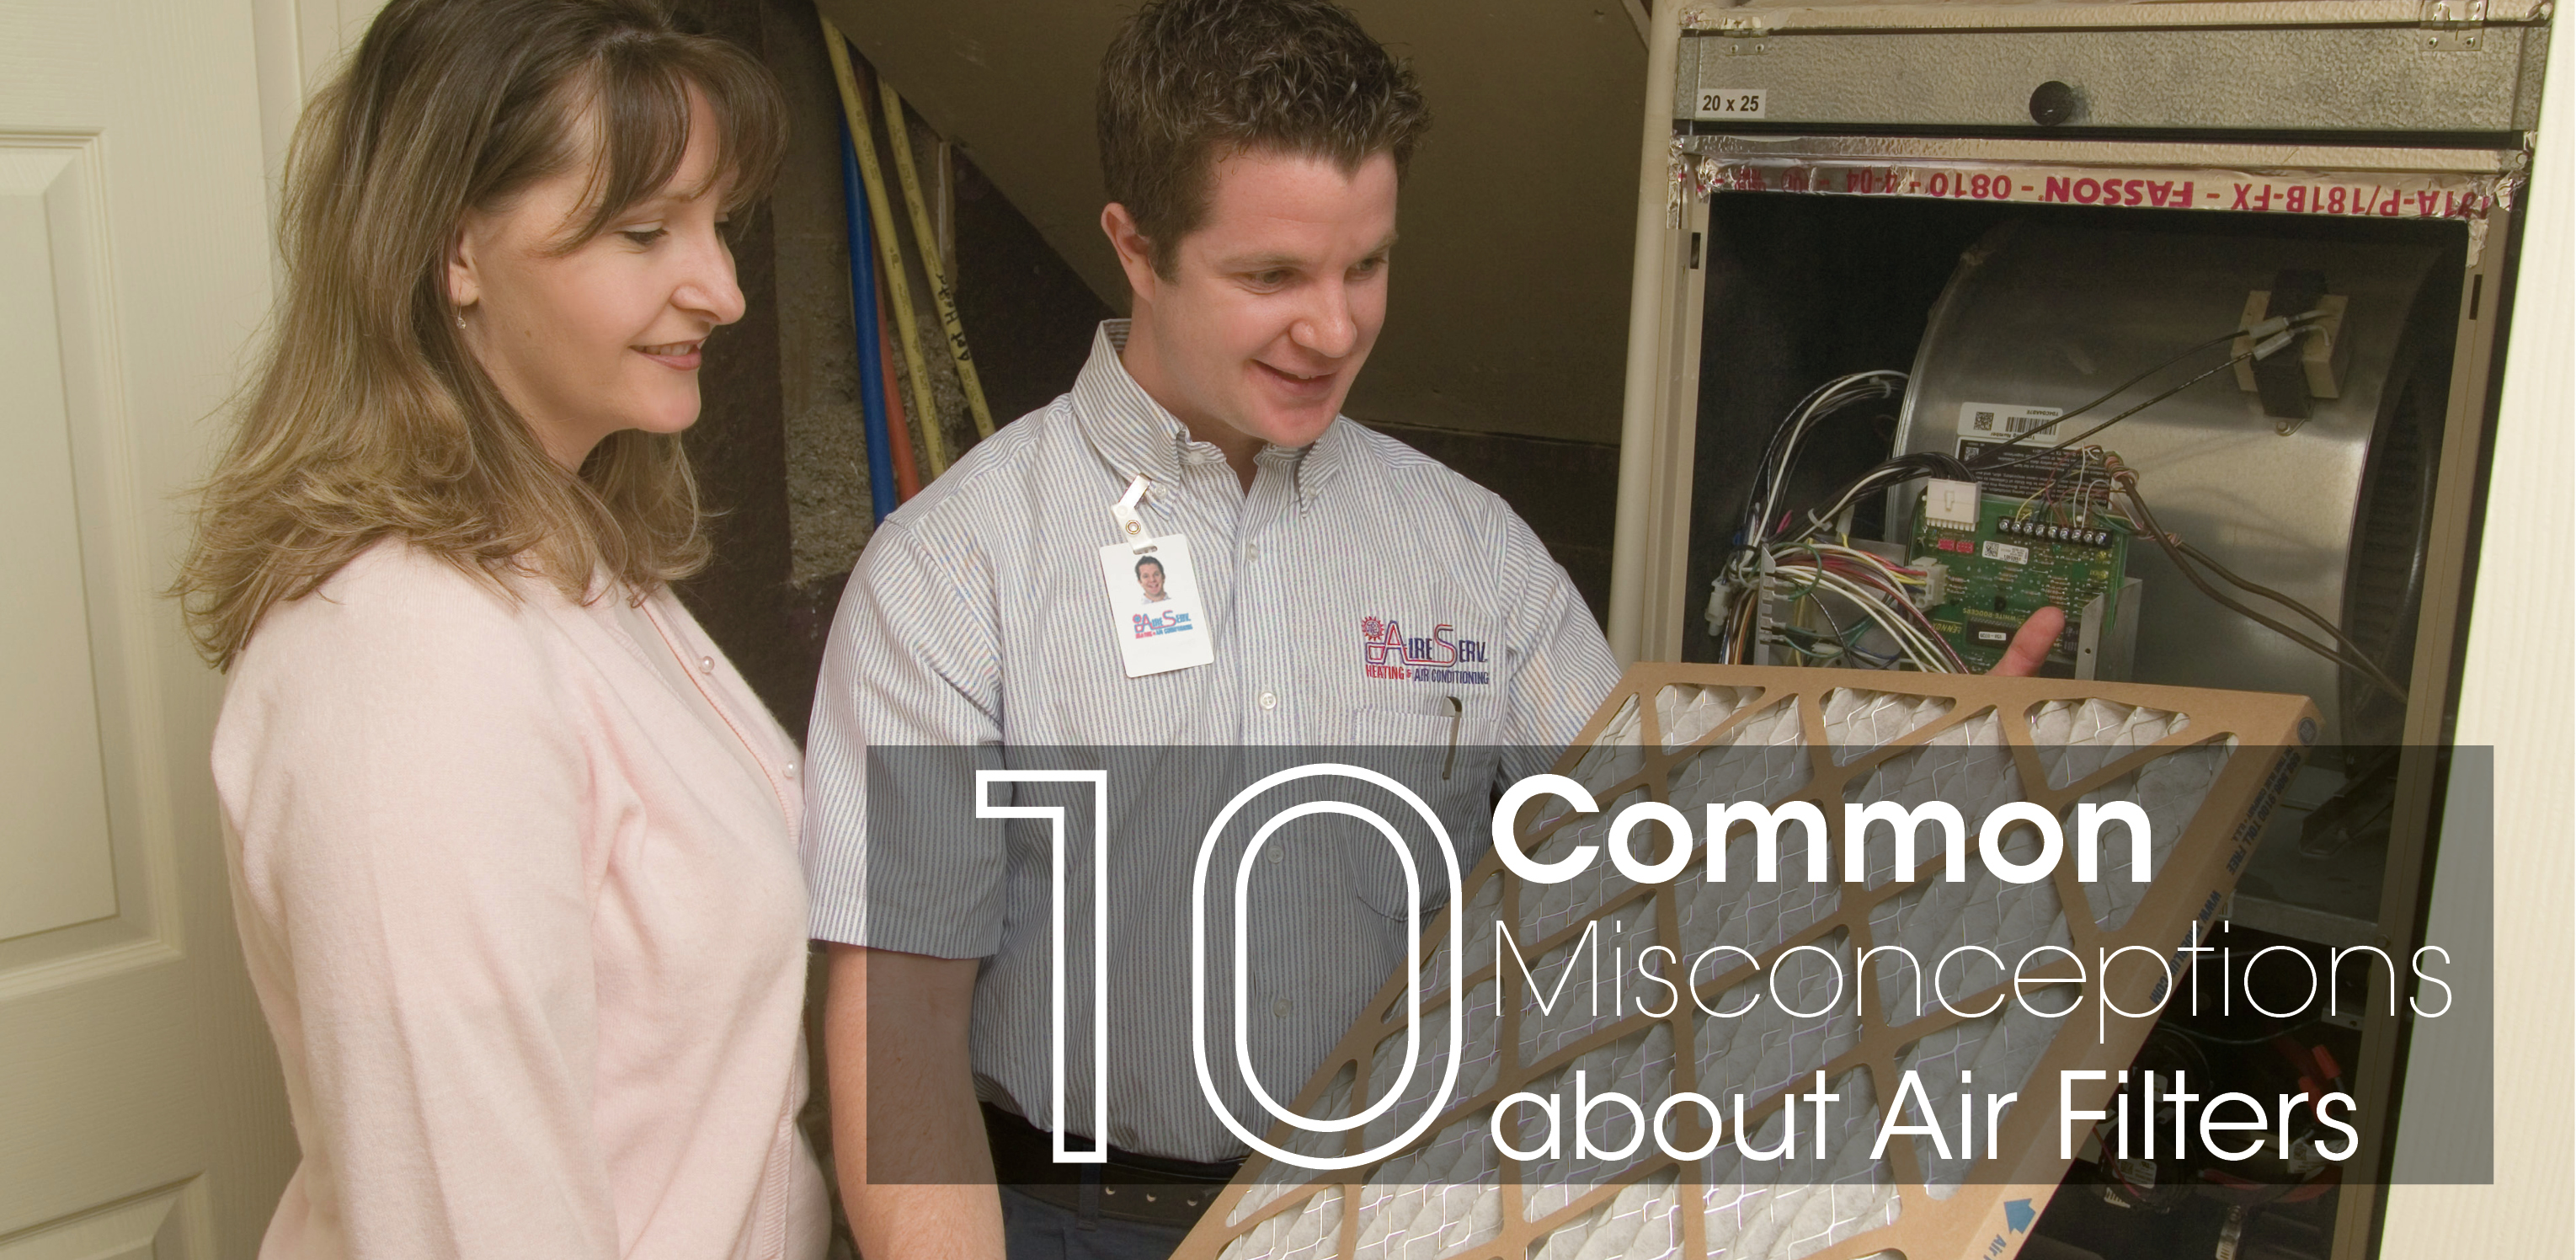 Blog title "10 common misconceptions about air filters" superimposed over a picture of a technician showing a customer an air filter